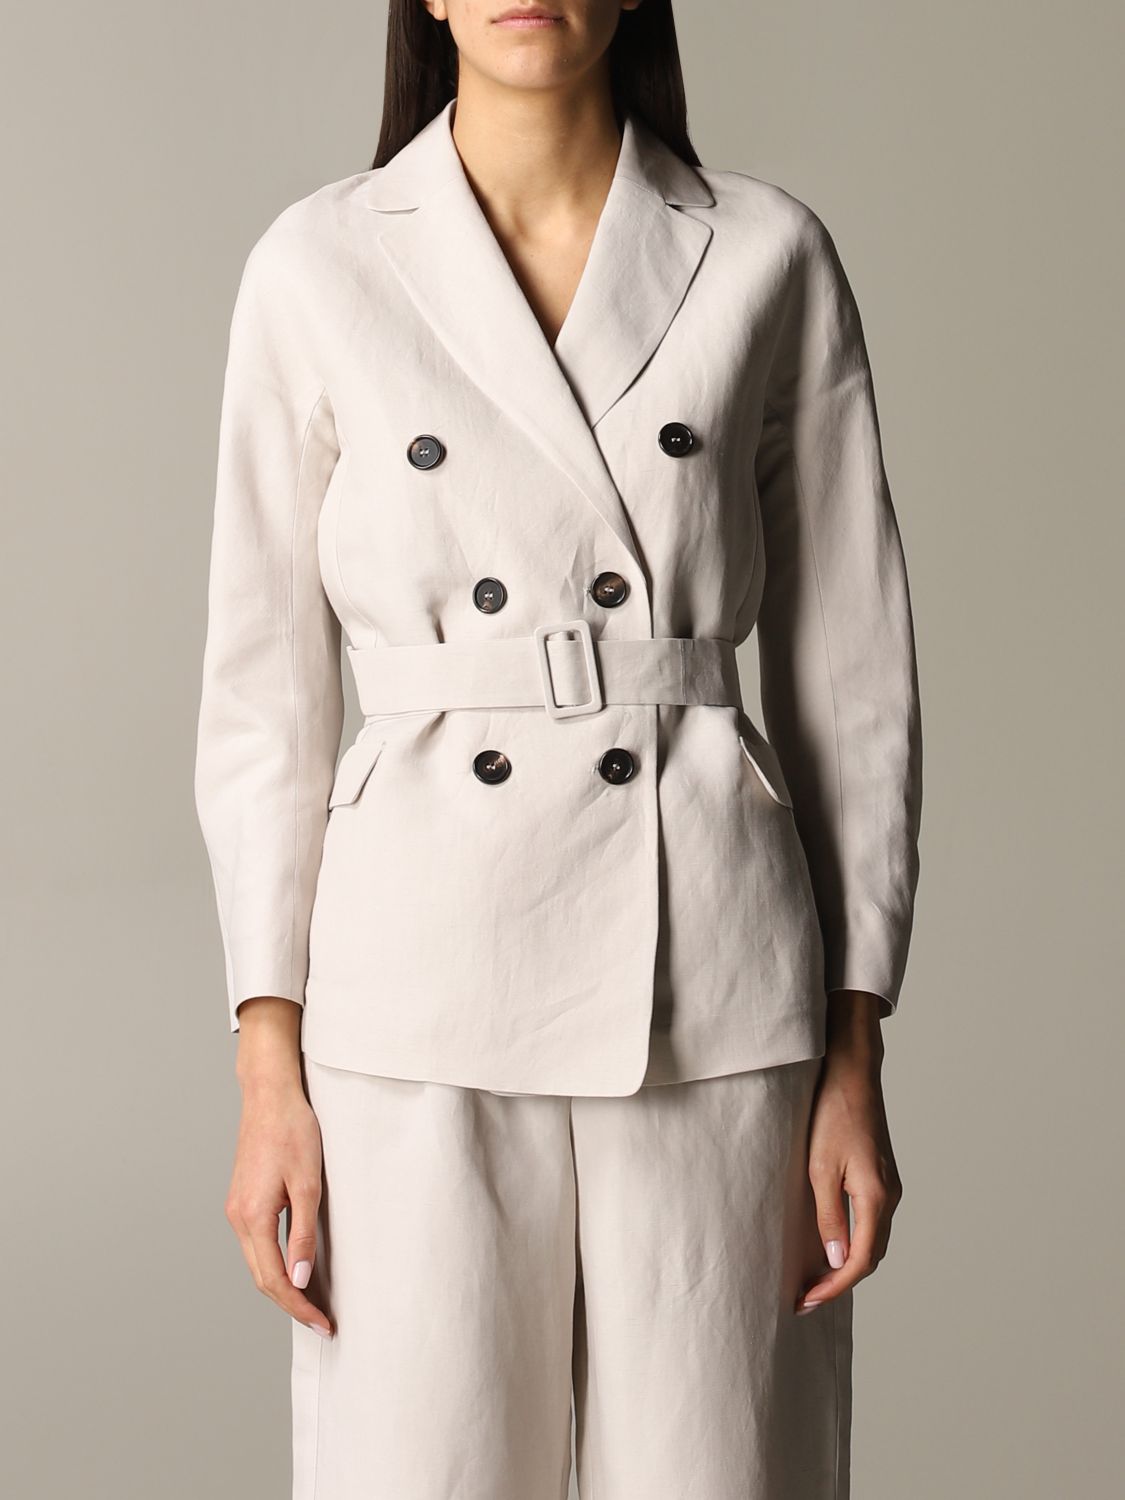 S Max Mara Outlet: Max Mara Oronte S double-breasted jacket in blend